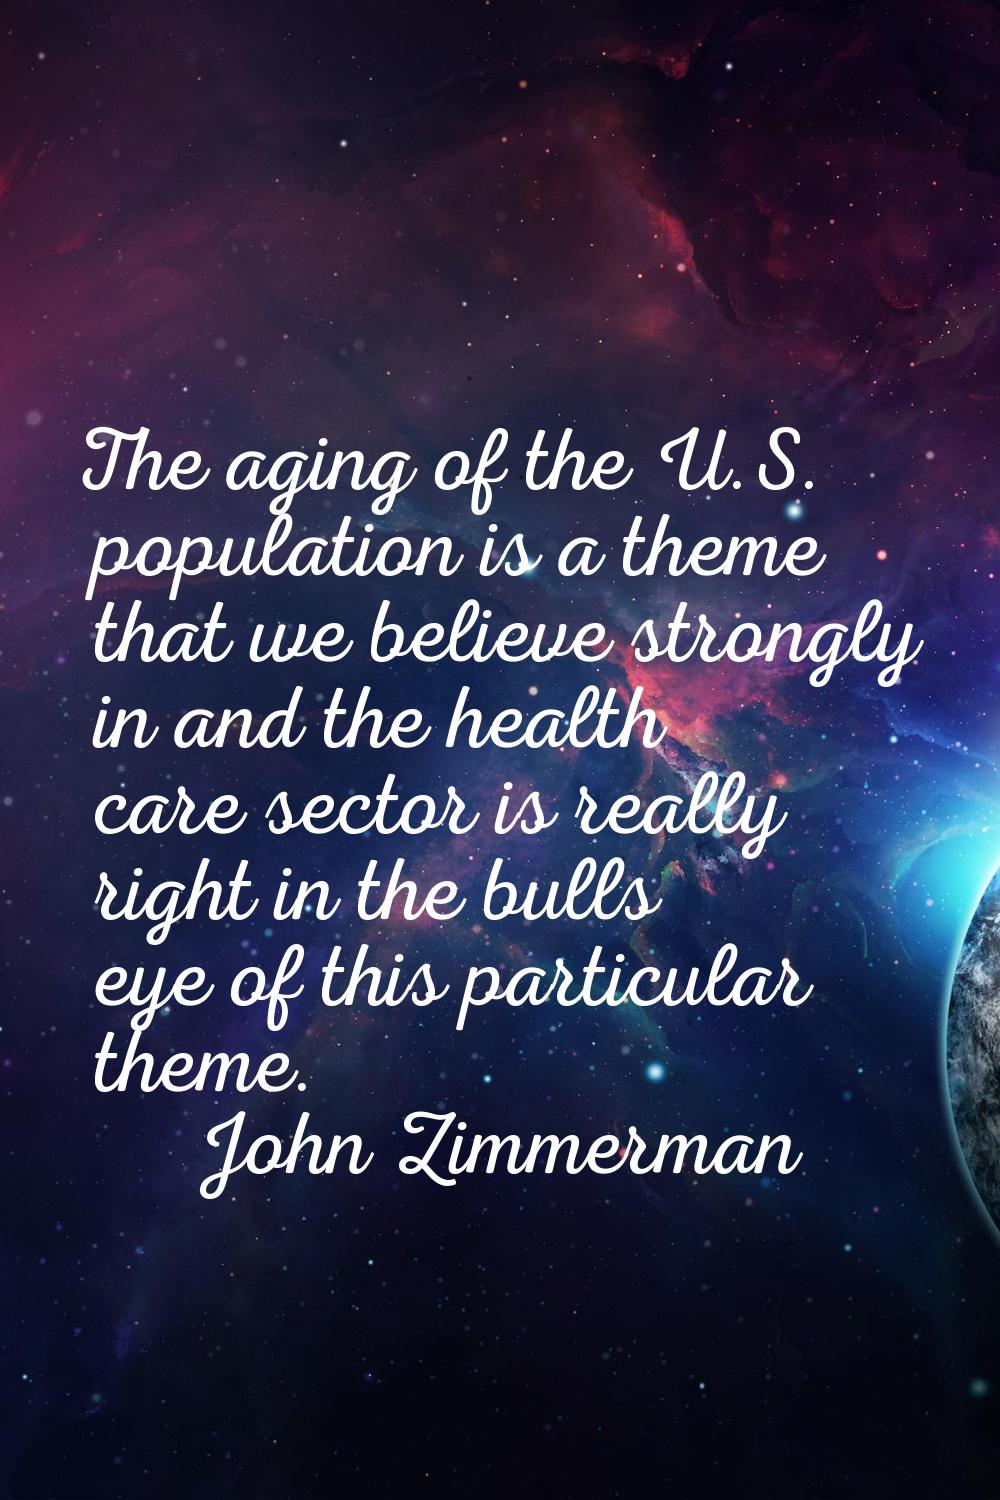 The aging of the U.S. population is a theme that we believe strongly in and the health care sector 